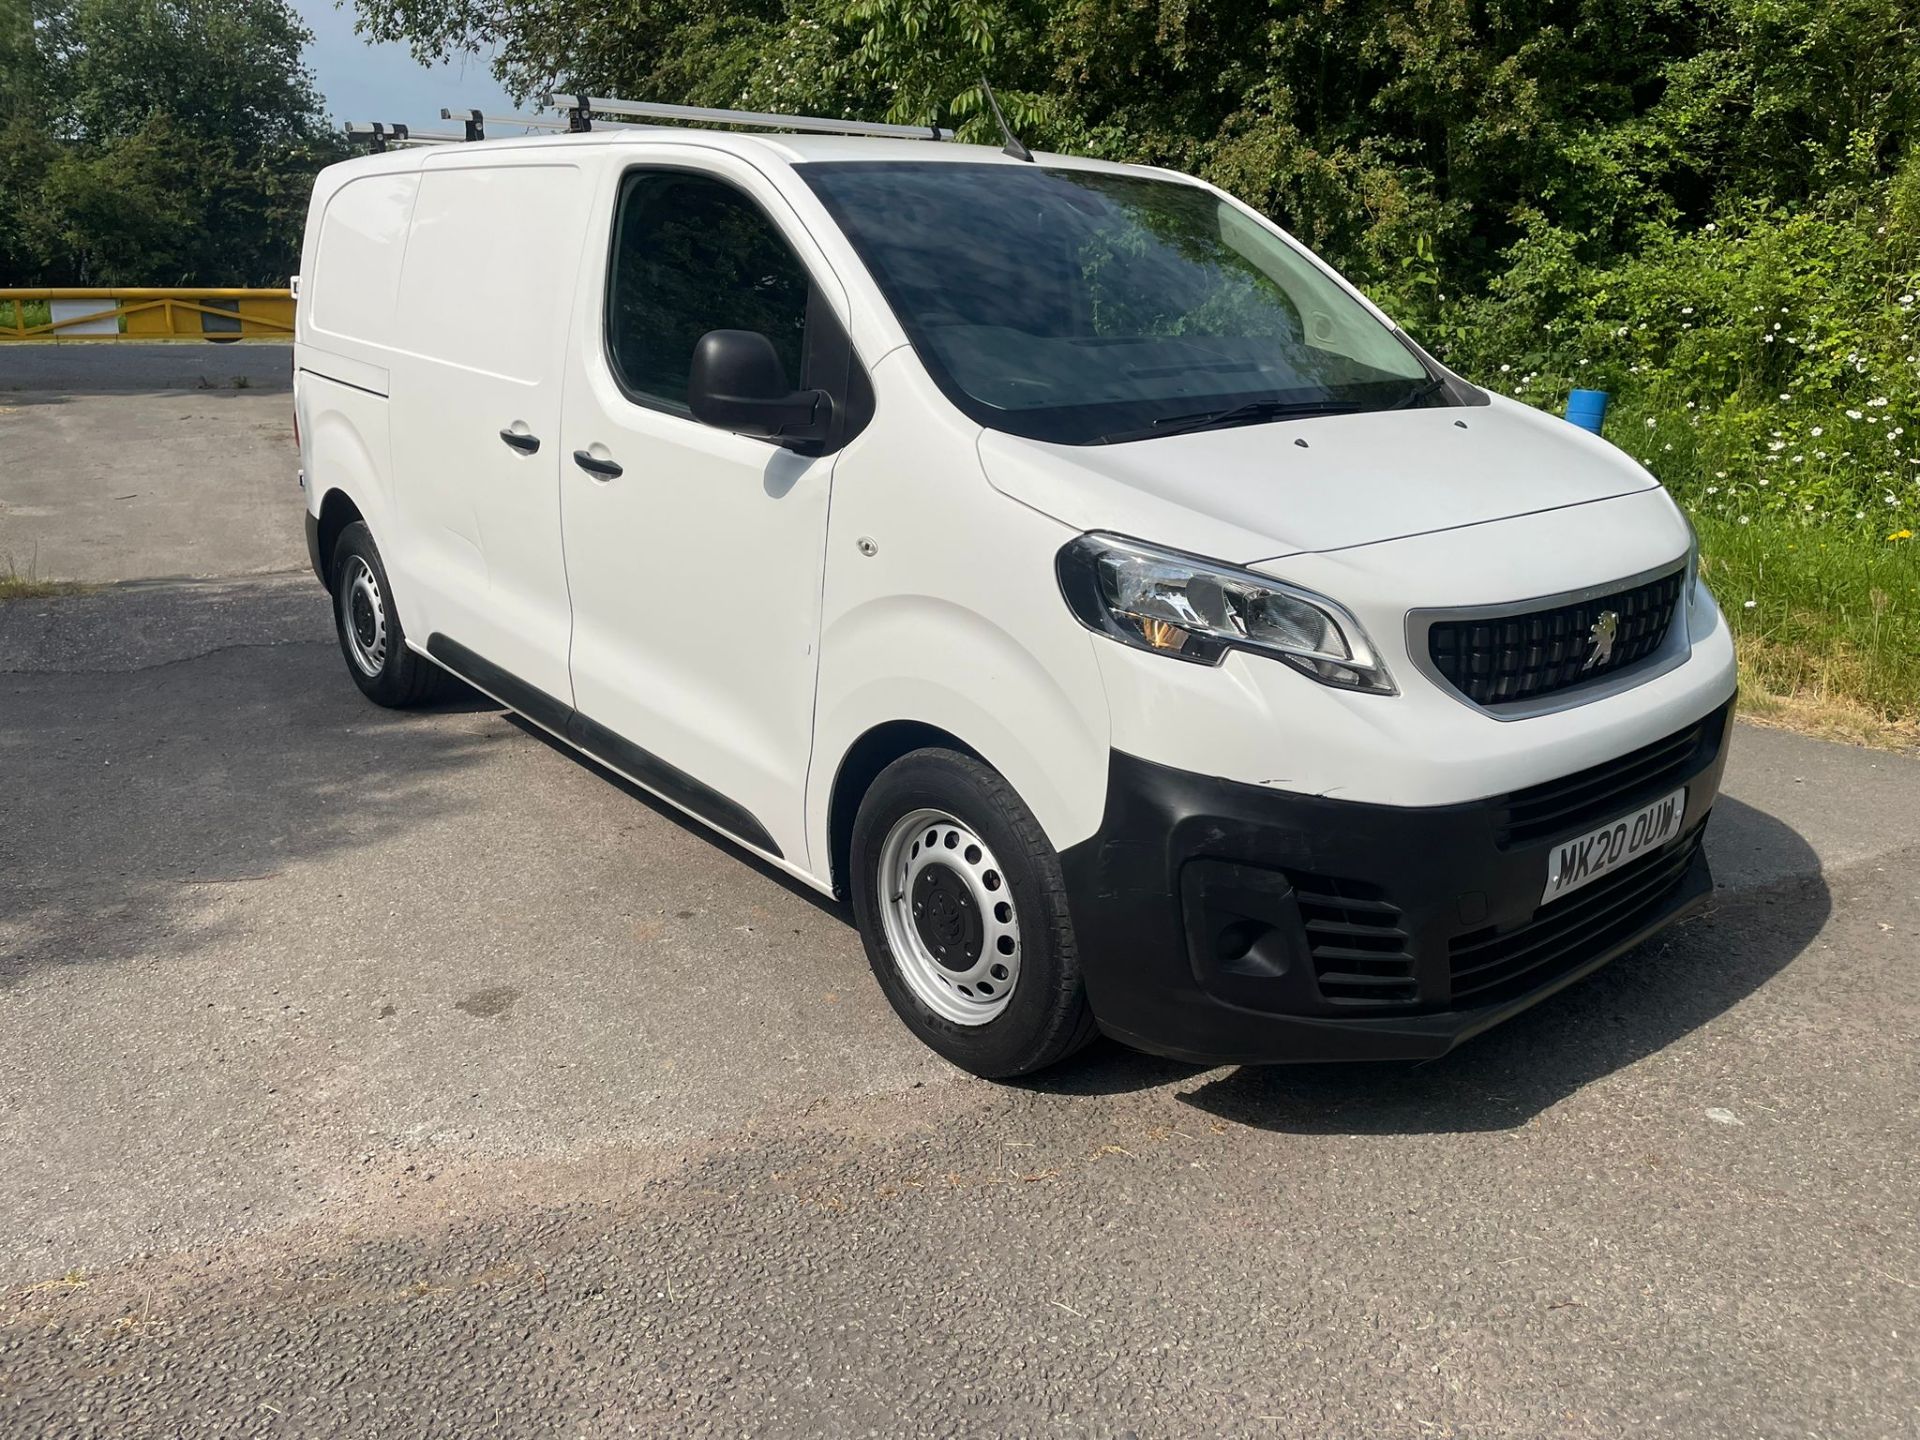 2020/20 REG PEUGEOT EXPERT PROFESSIONAL L1 BLUE HDI 2.0 DIESEL LOW MILES, SHOWING 0 FORMER KEEPERS